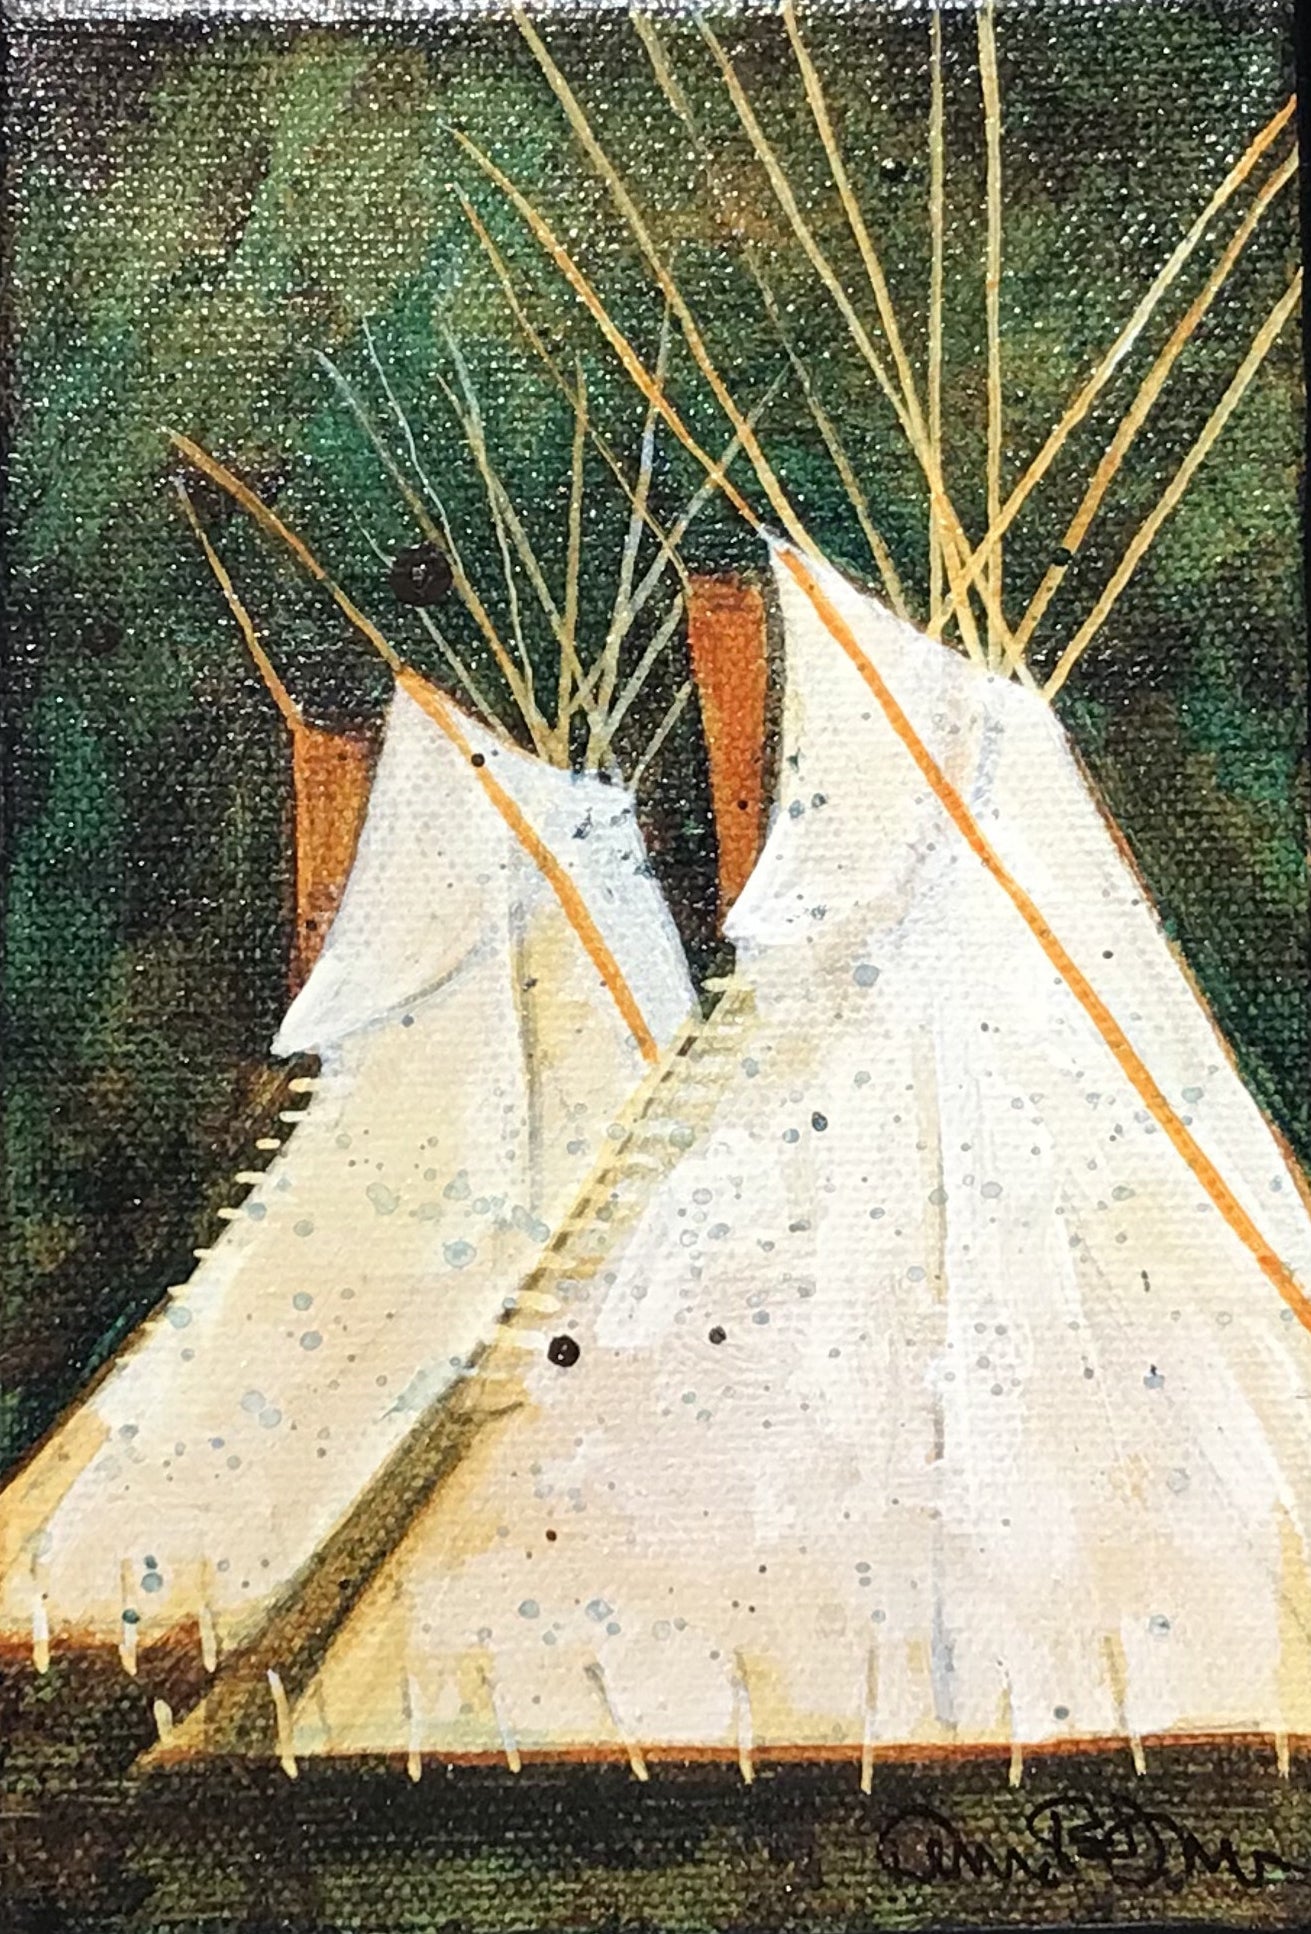 Crow Camp-Painting-Kevin Red Star-Sorrel Sky Gallery